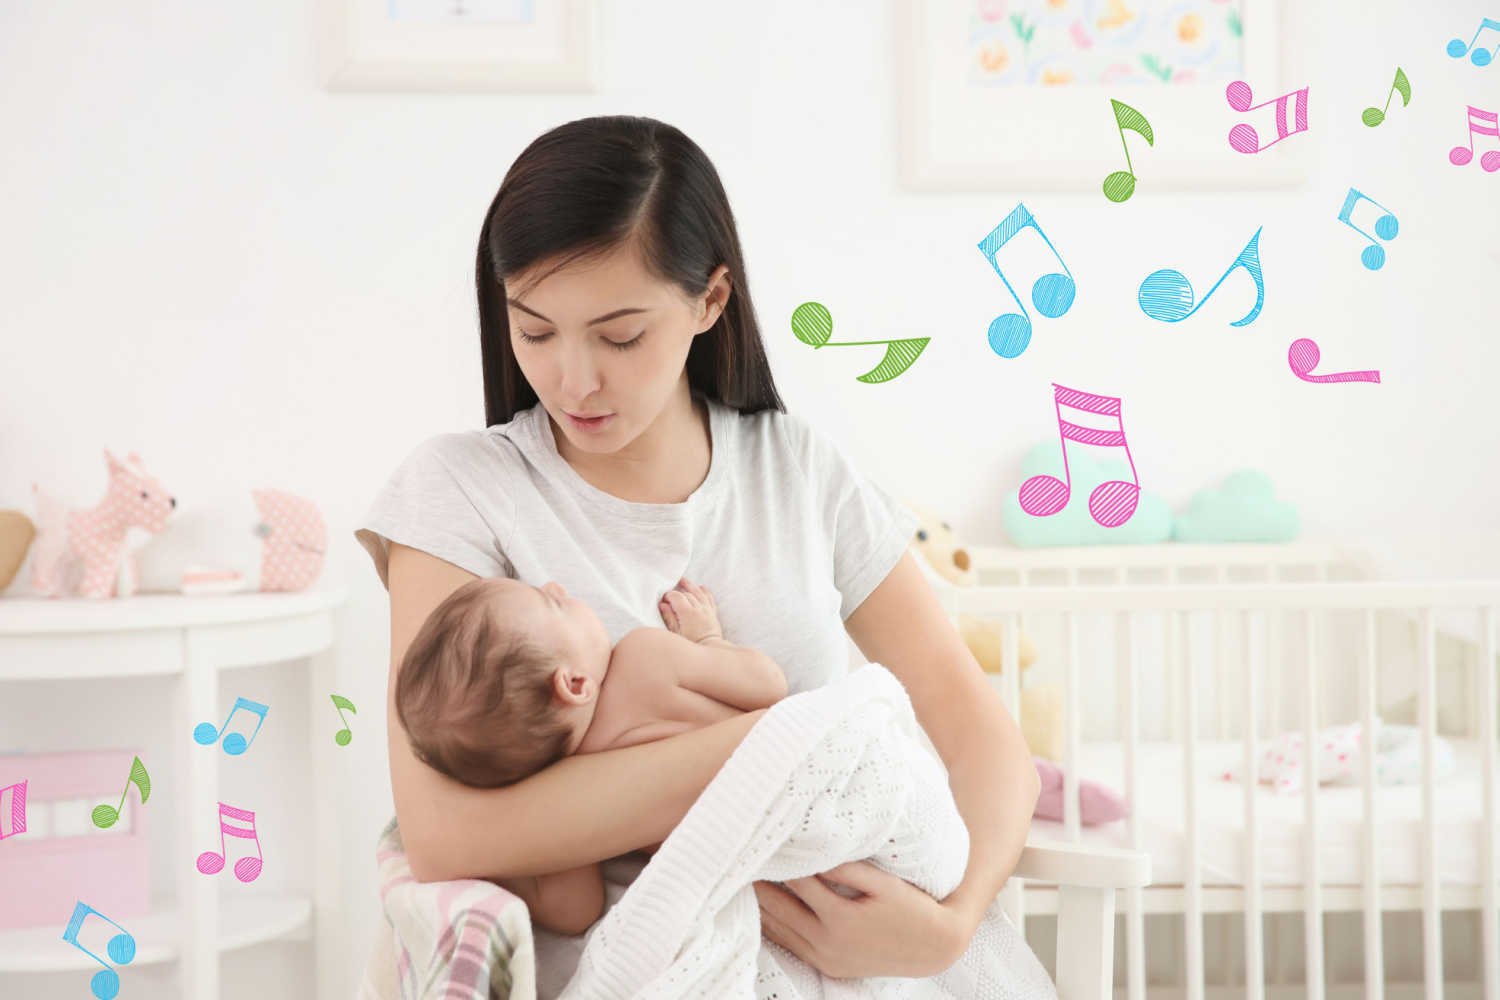 Top Best Baby Songs to Sing to Your Baby With Videos